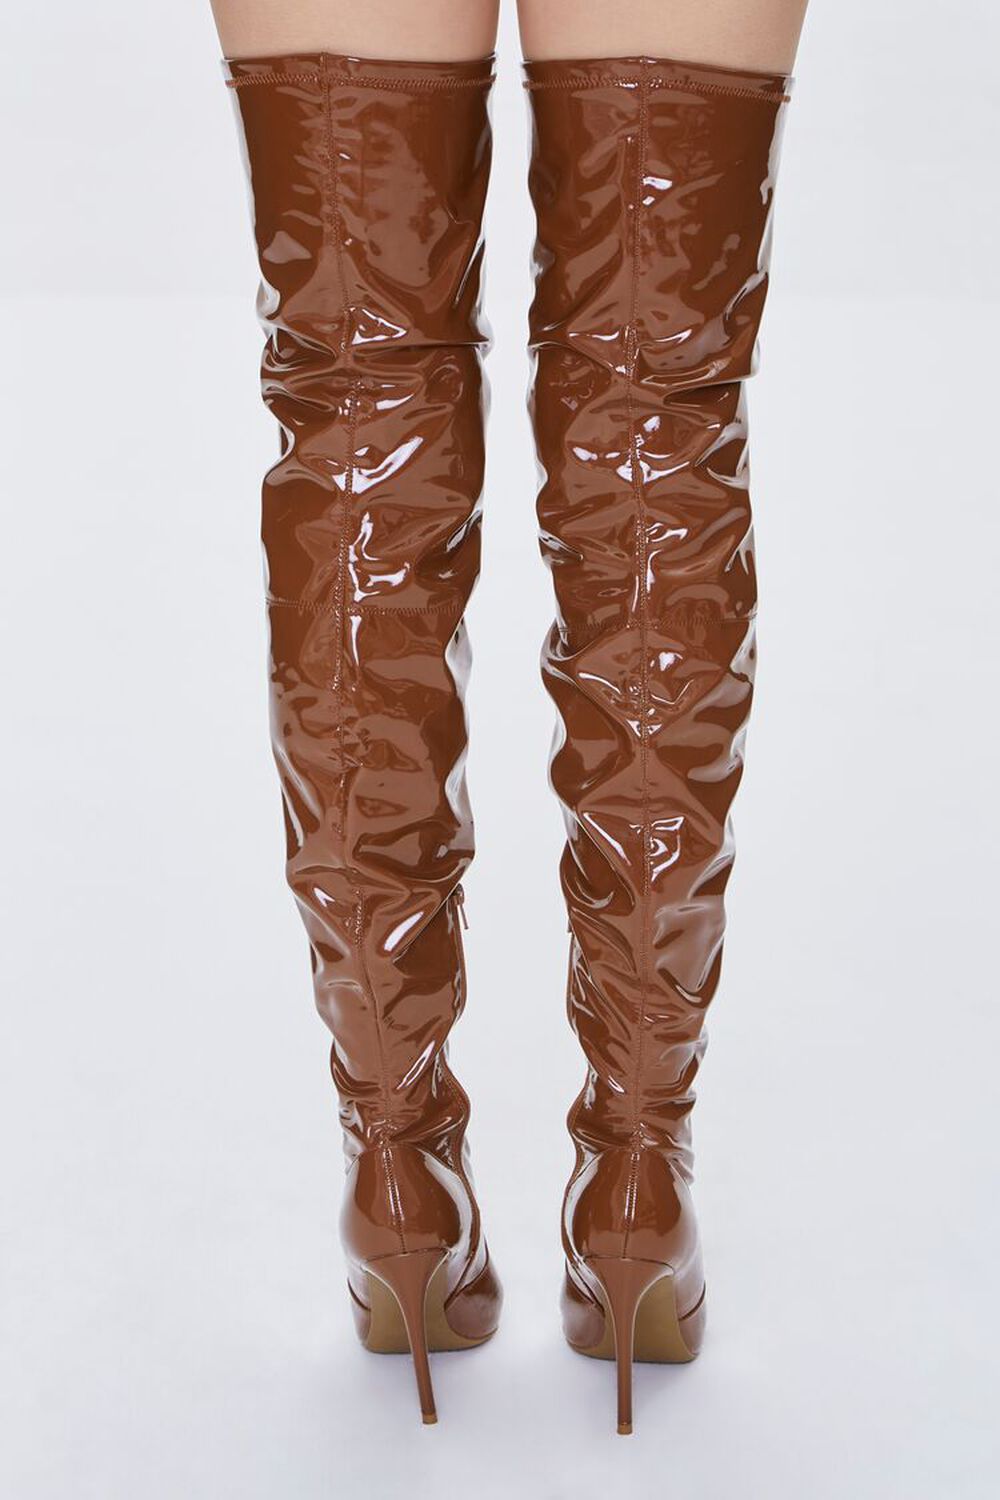 BROWN Faux Patent Leather Thigh-High Boots, image 3